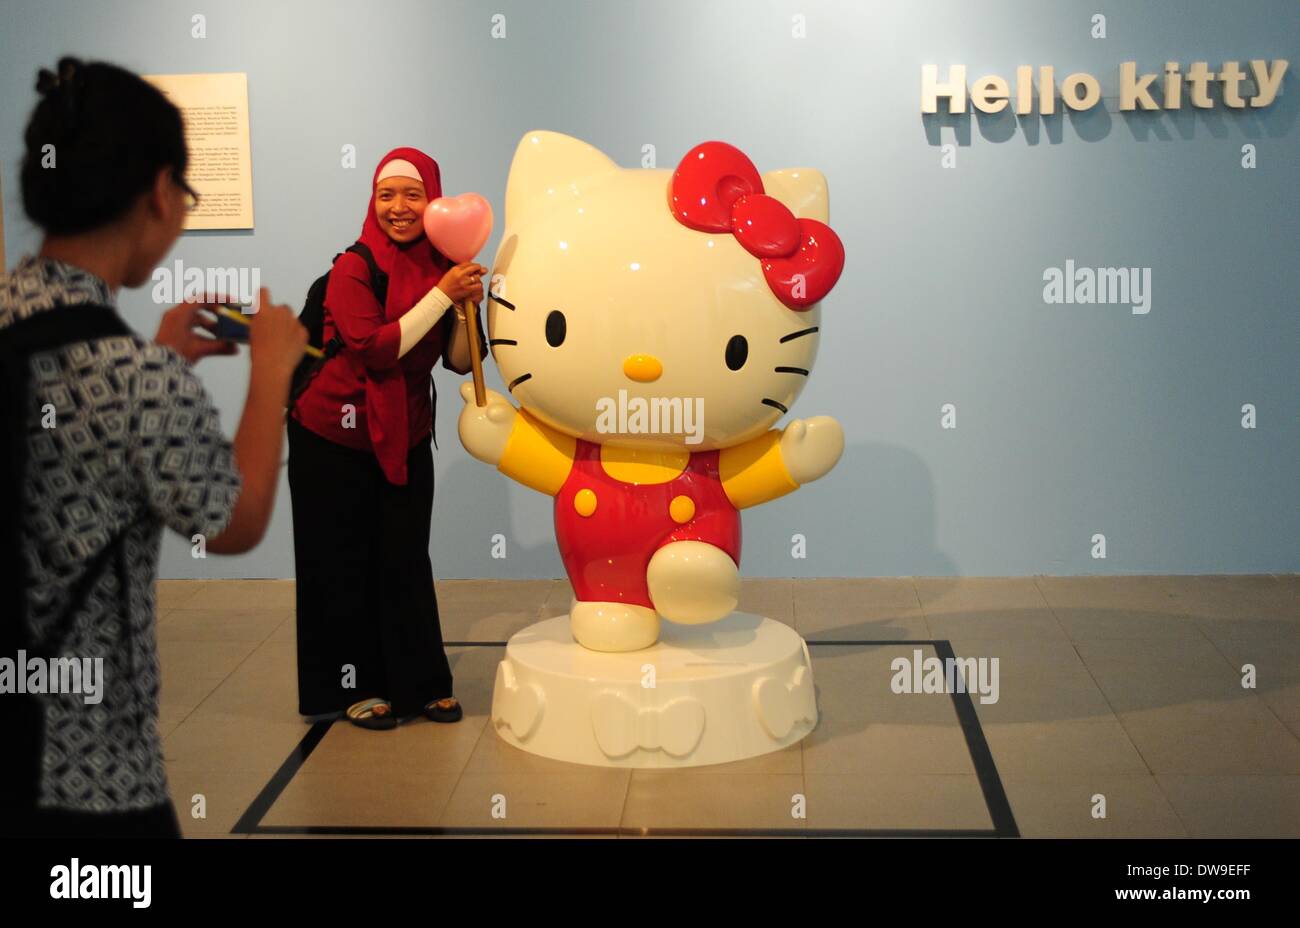 Jakarta, Indonesia. 4th Mar, 2014. A woman poses for photos beside a cartoon character during the Japanese Pop Culture Characters Exhibition in Jakarta, Indonesia, March 4, 2014. The exhibition is held from March 4 to March 23. © Zulkarnain/Xinhua/Alamy Live News Stock Photo